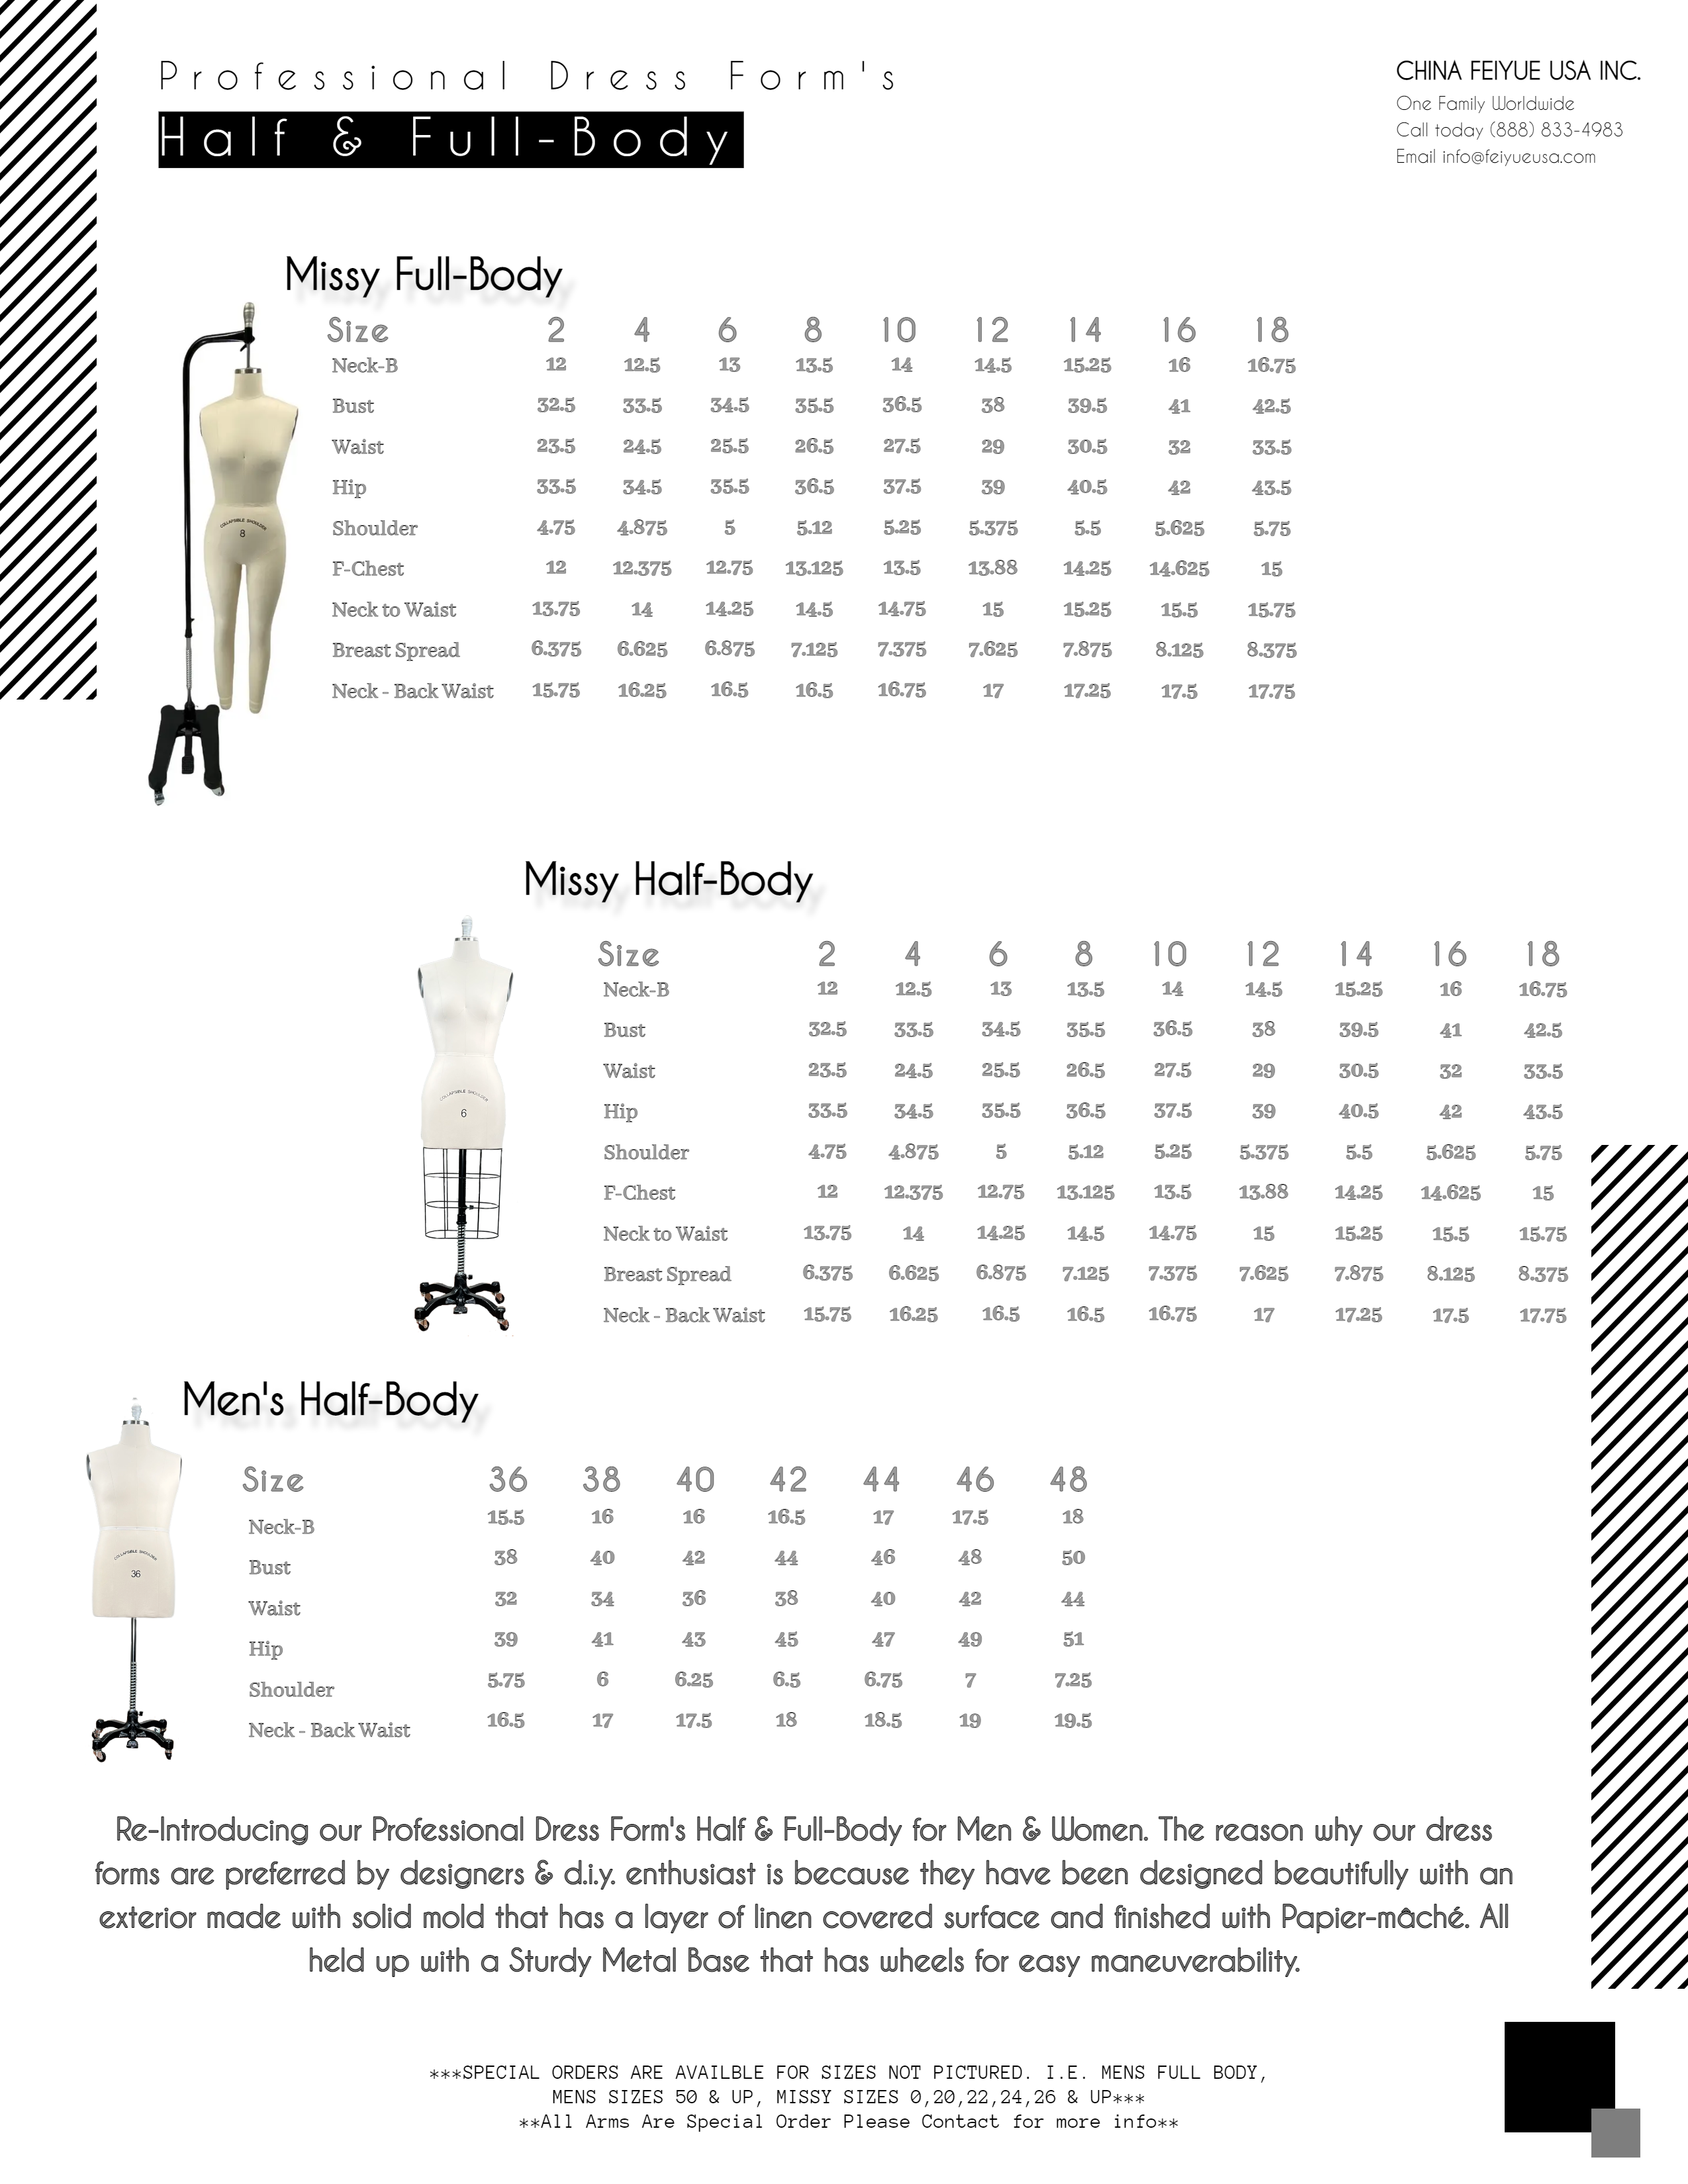 Female Full Body Professional Dress Form With Collapsible Shoulders - Dress  Forms USA